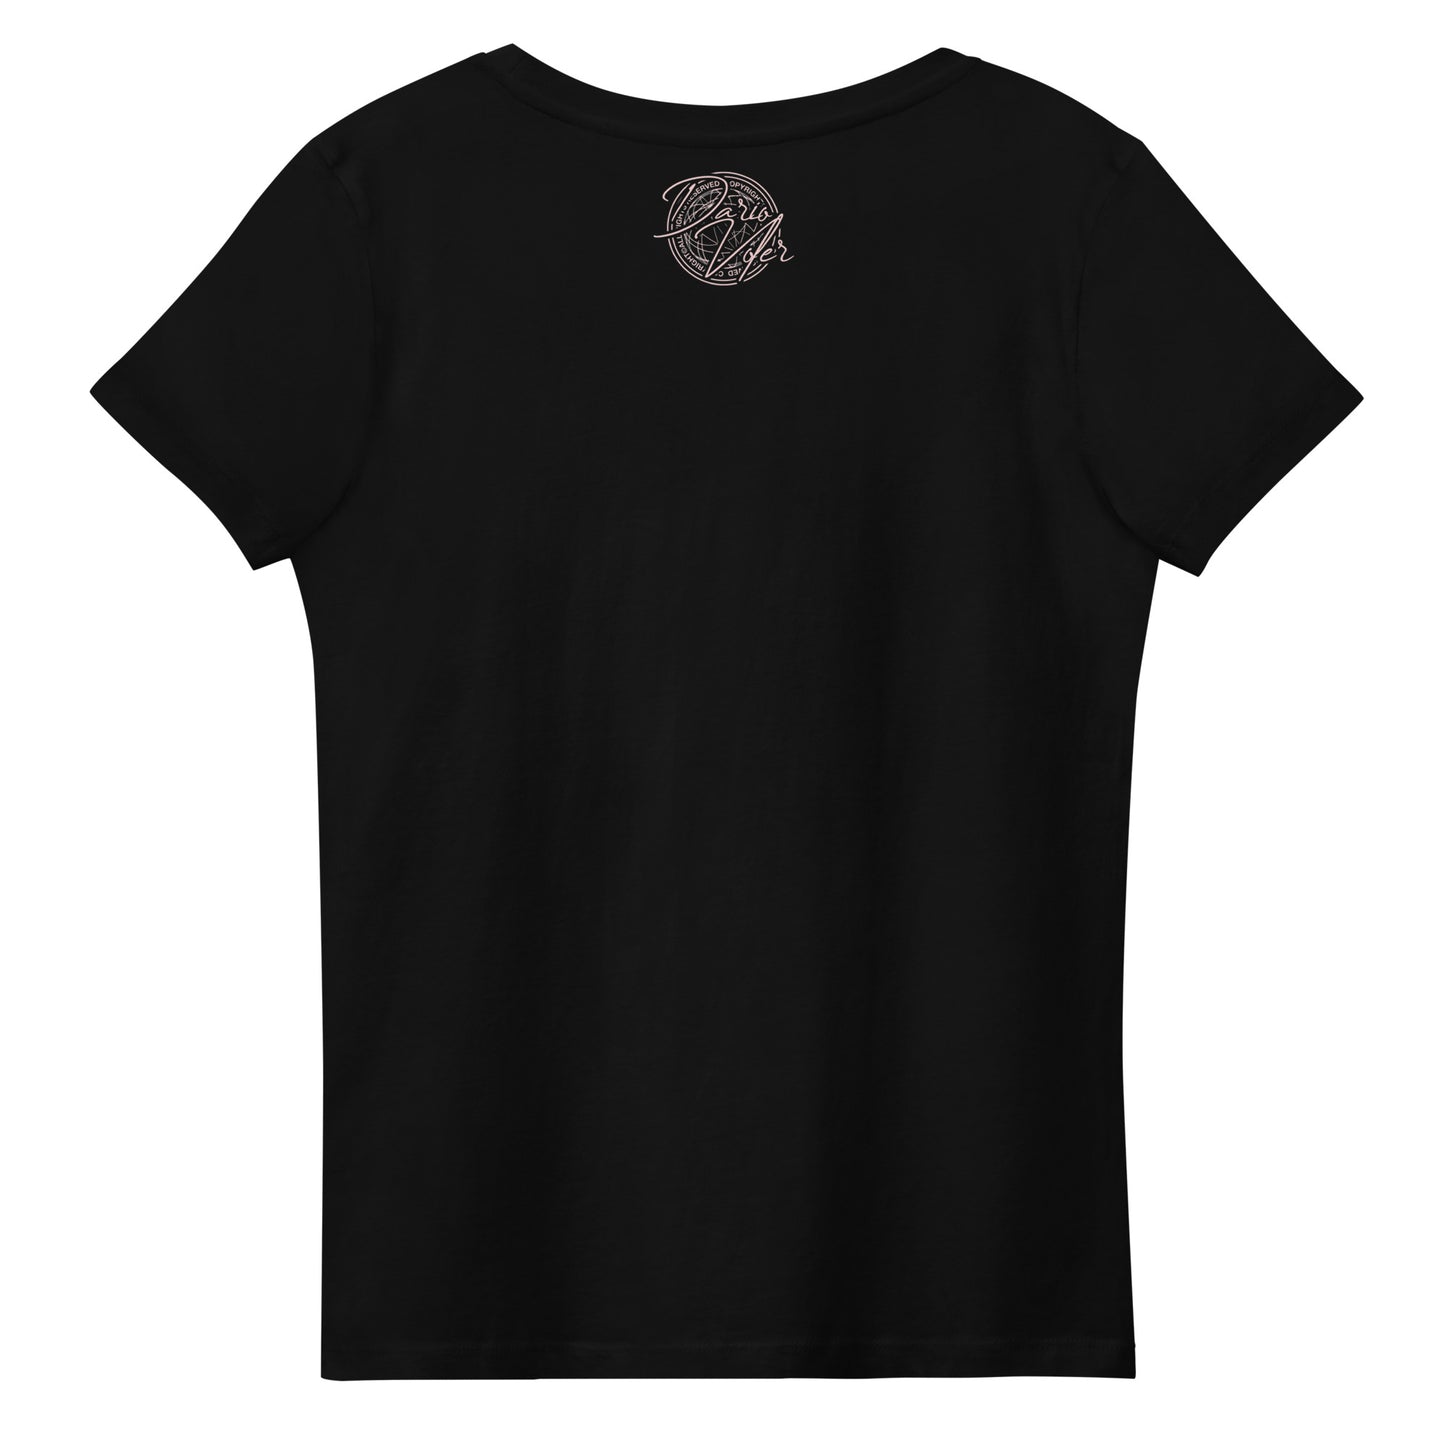 Women's Divine Angel fitted tee